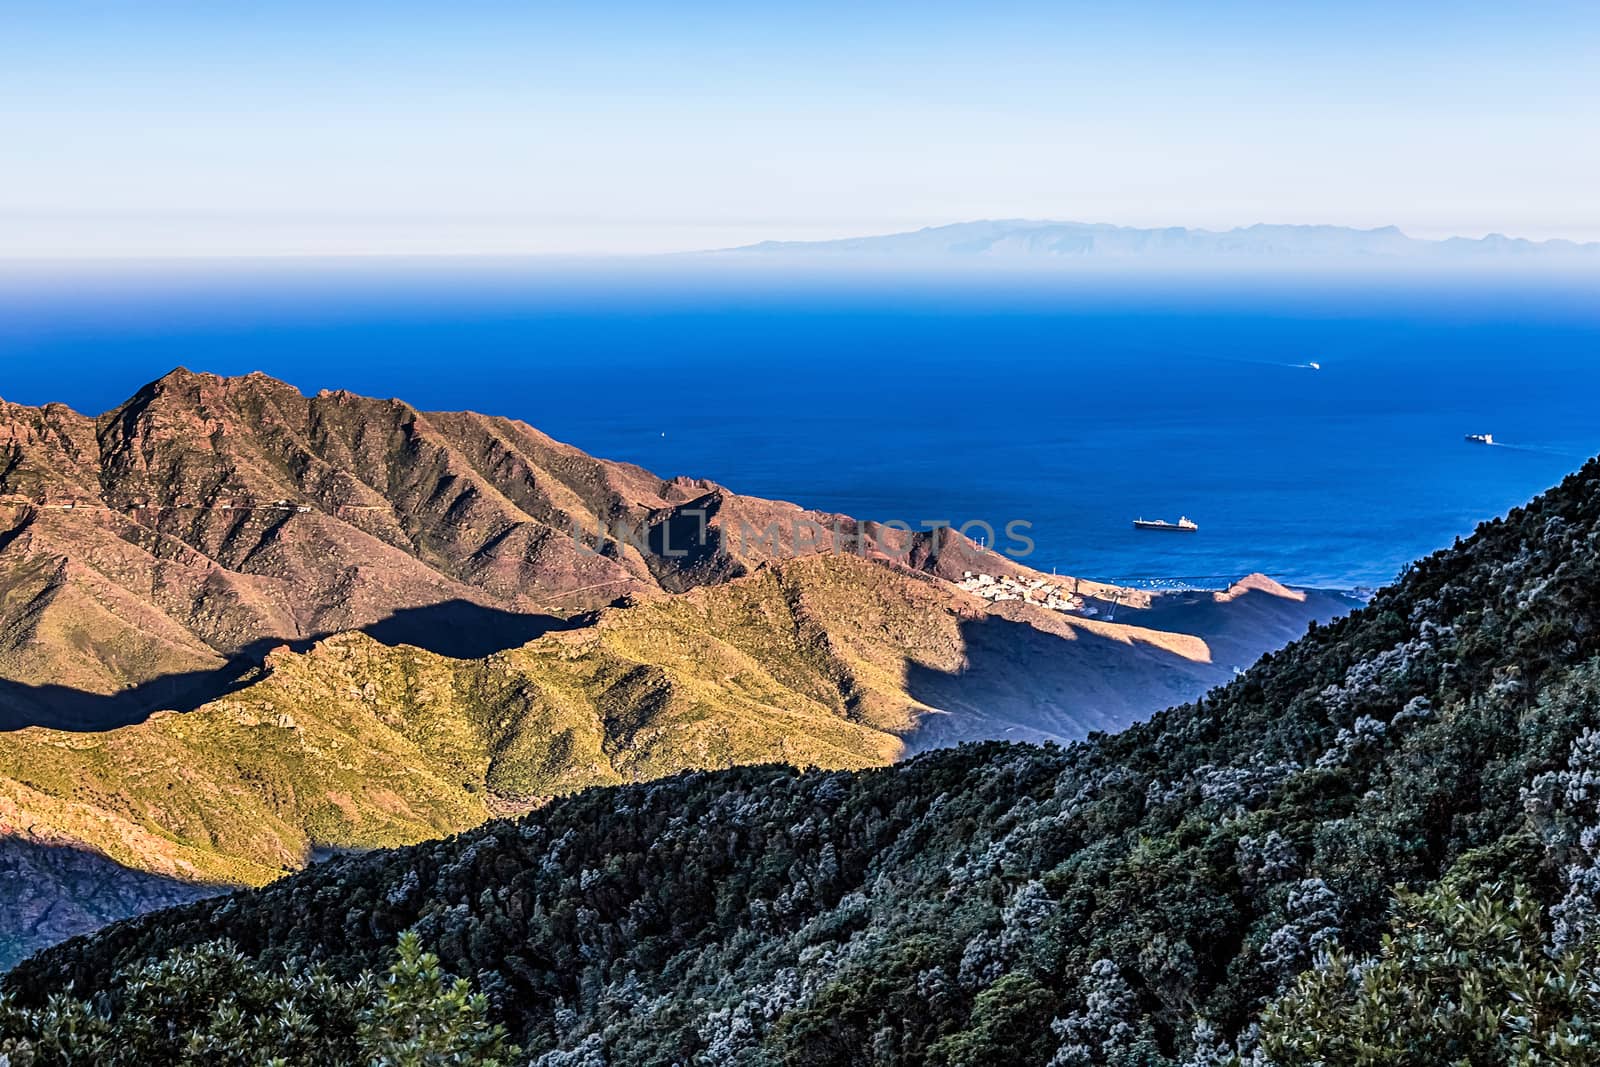 Coast of Atlantic ocean with green mountain or rock and blue sky with horizon in Tenerife Canary island, Spain at spring or summer